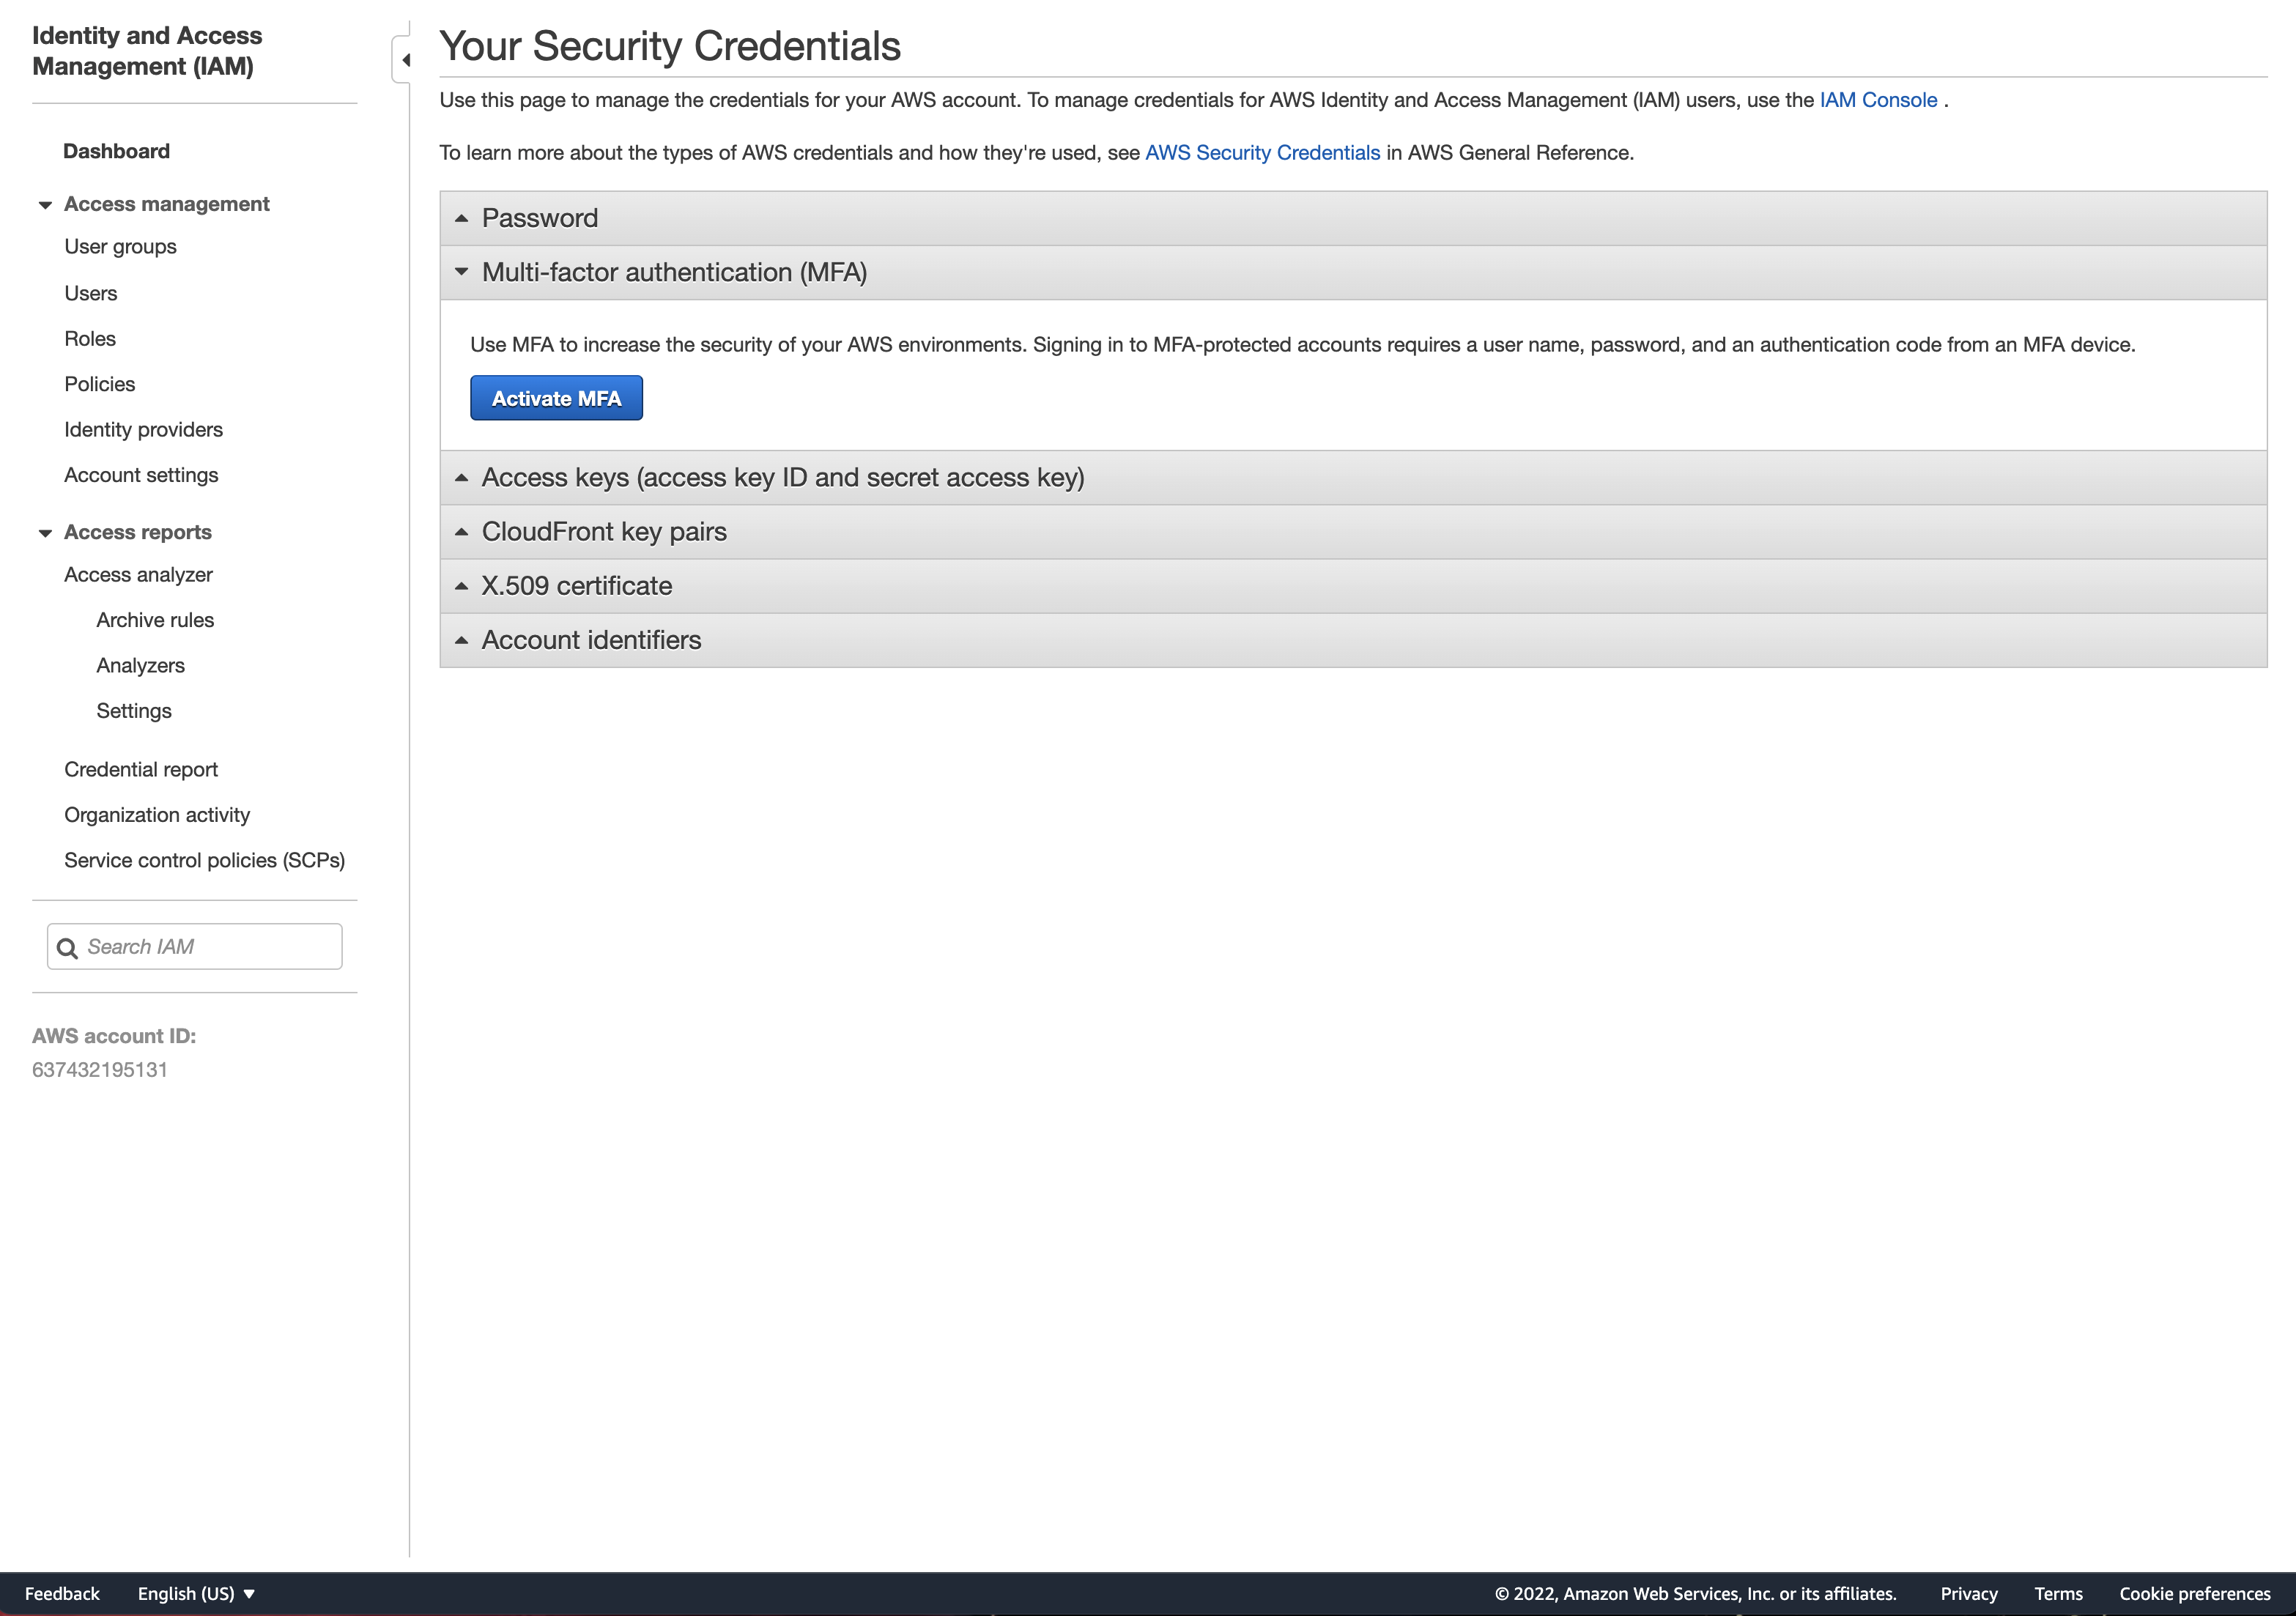 Your Security Credentials Screen